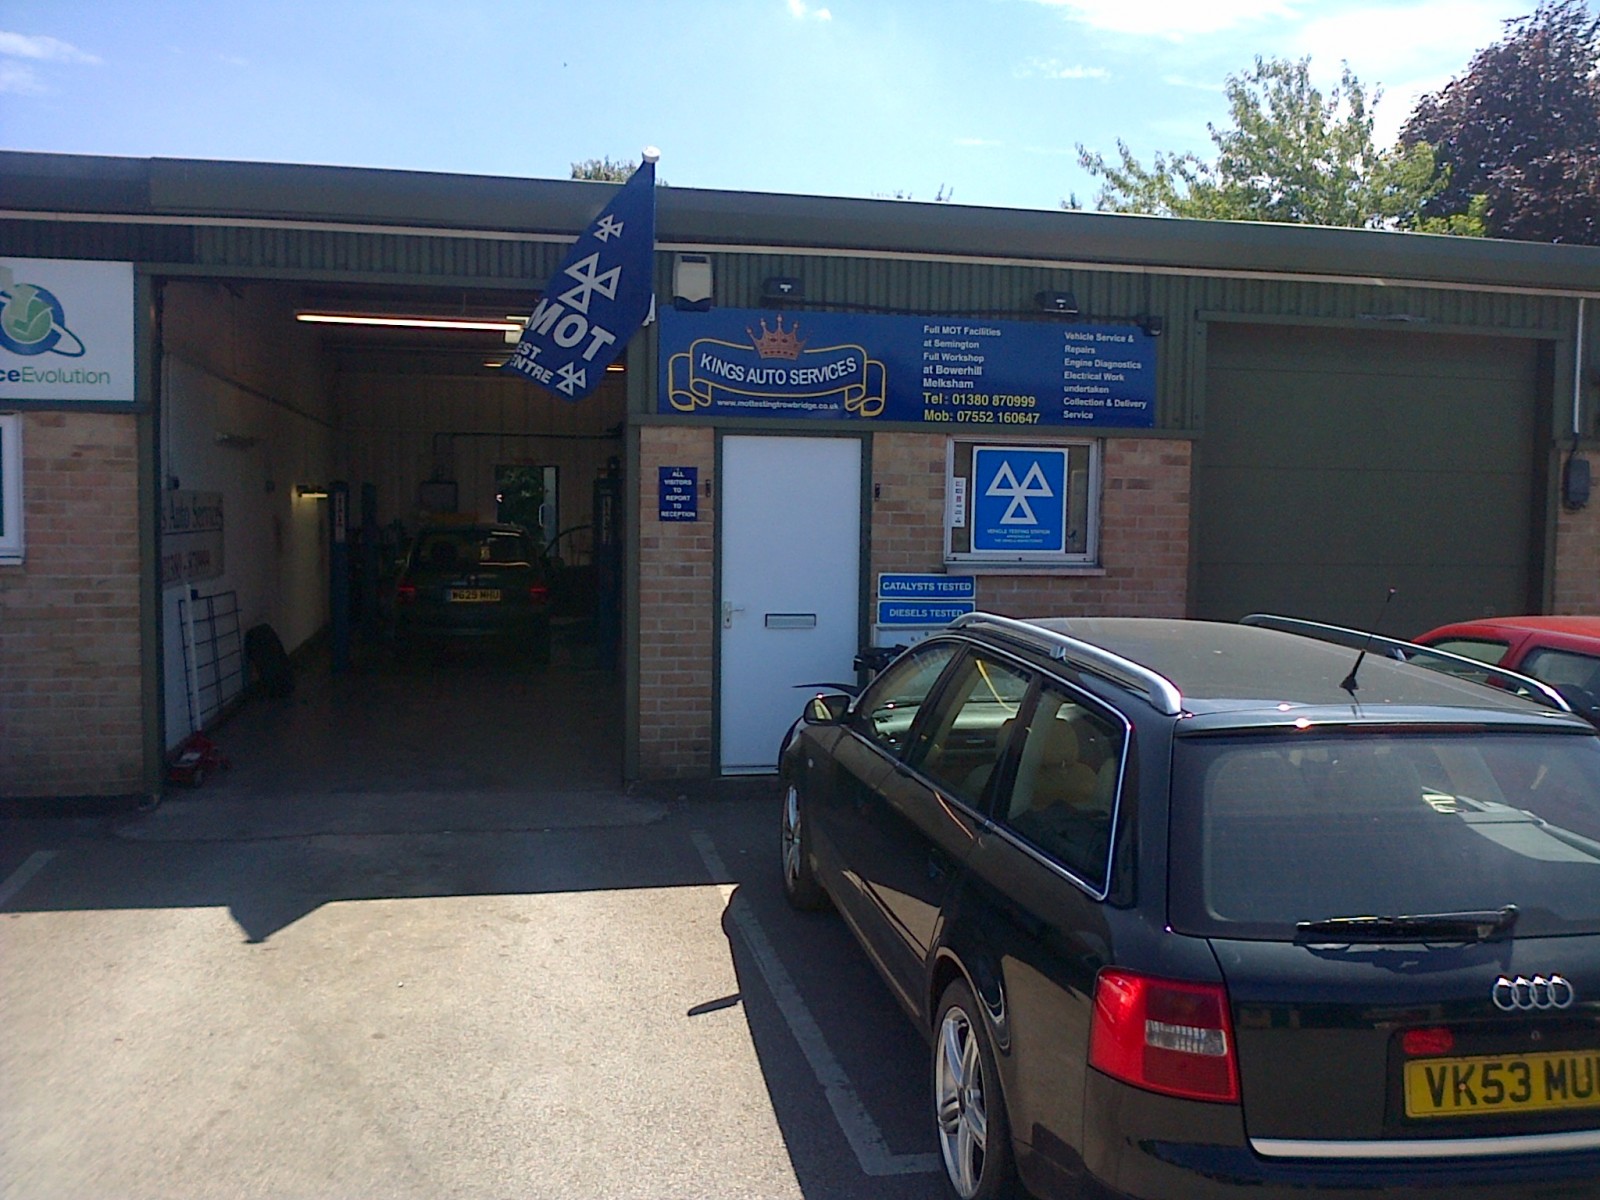 Image 5 of Kings Auto Services